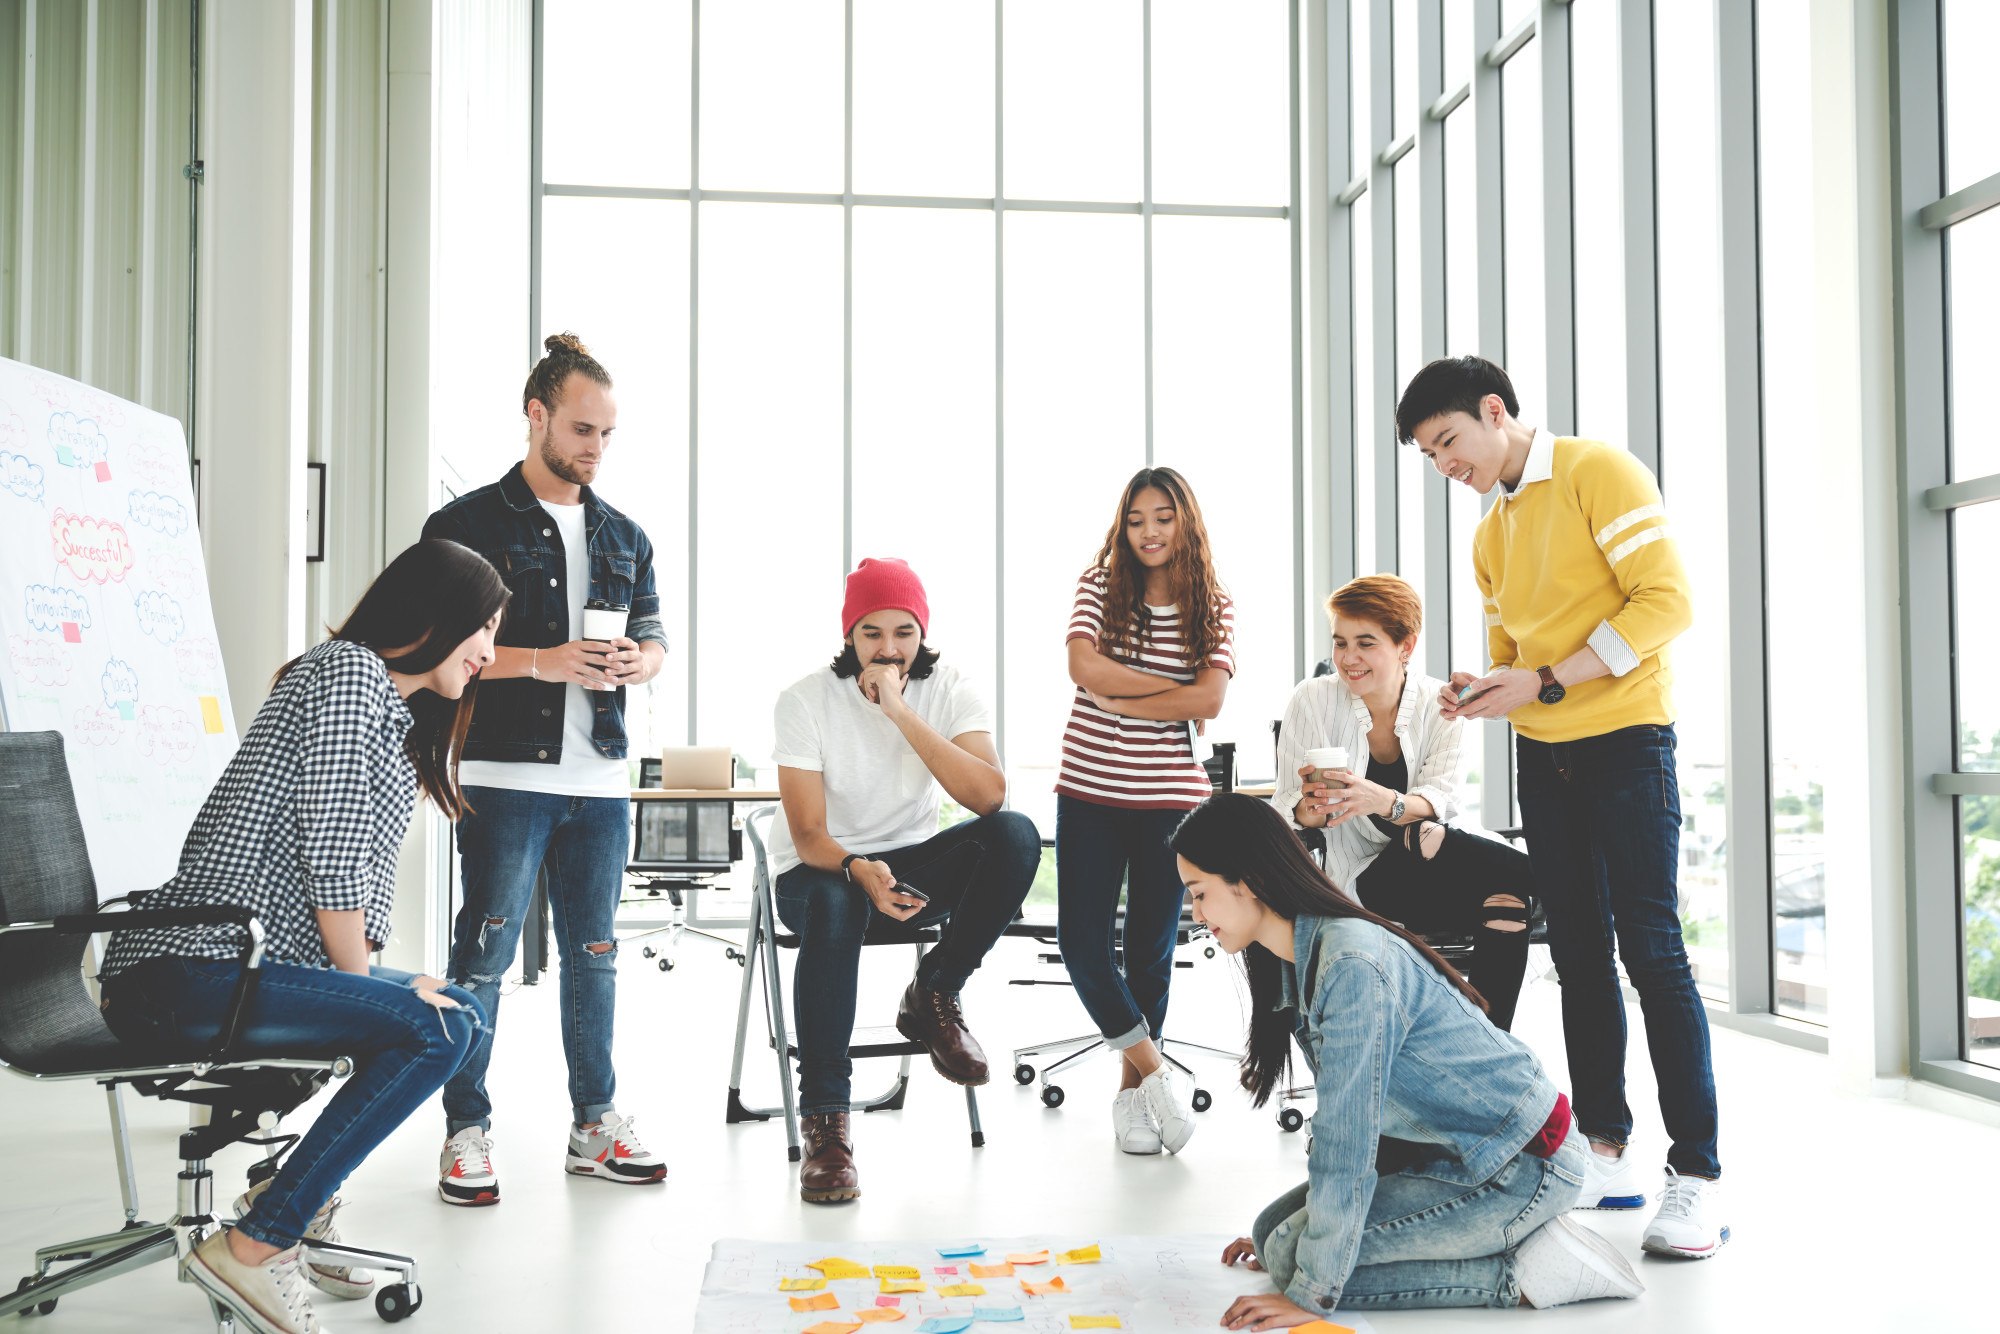 5 Team Building Games Your Employees Will Love - Bank2home.com